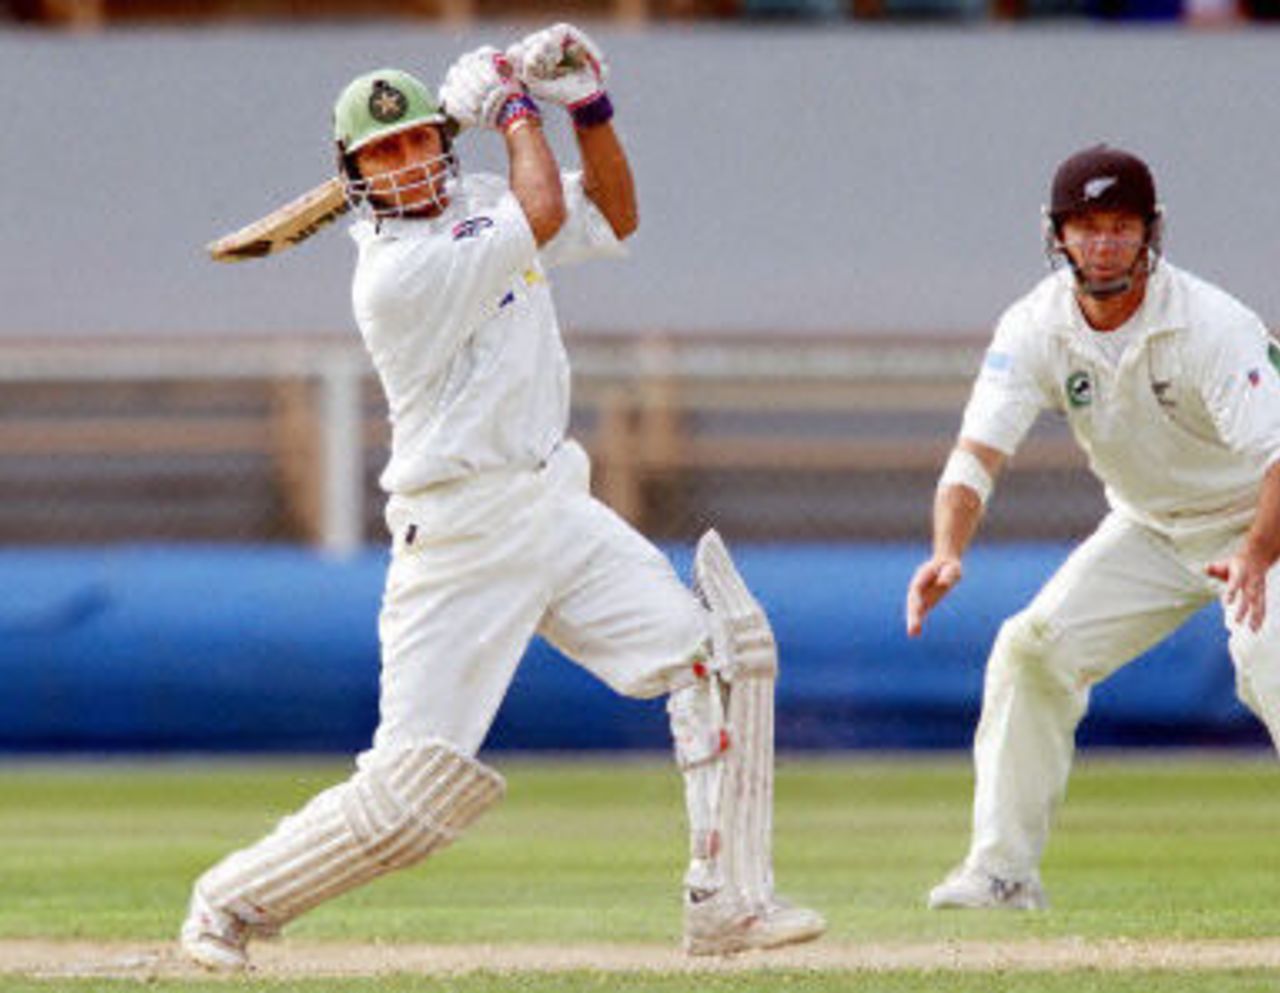 Faisal Iqbal cracks a ball to the boundary as Mark Richardson looks on, day 3, 2nd Test at Christchurch, 15-19 March 2001.